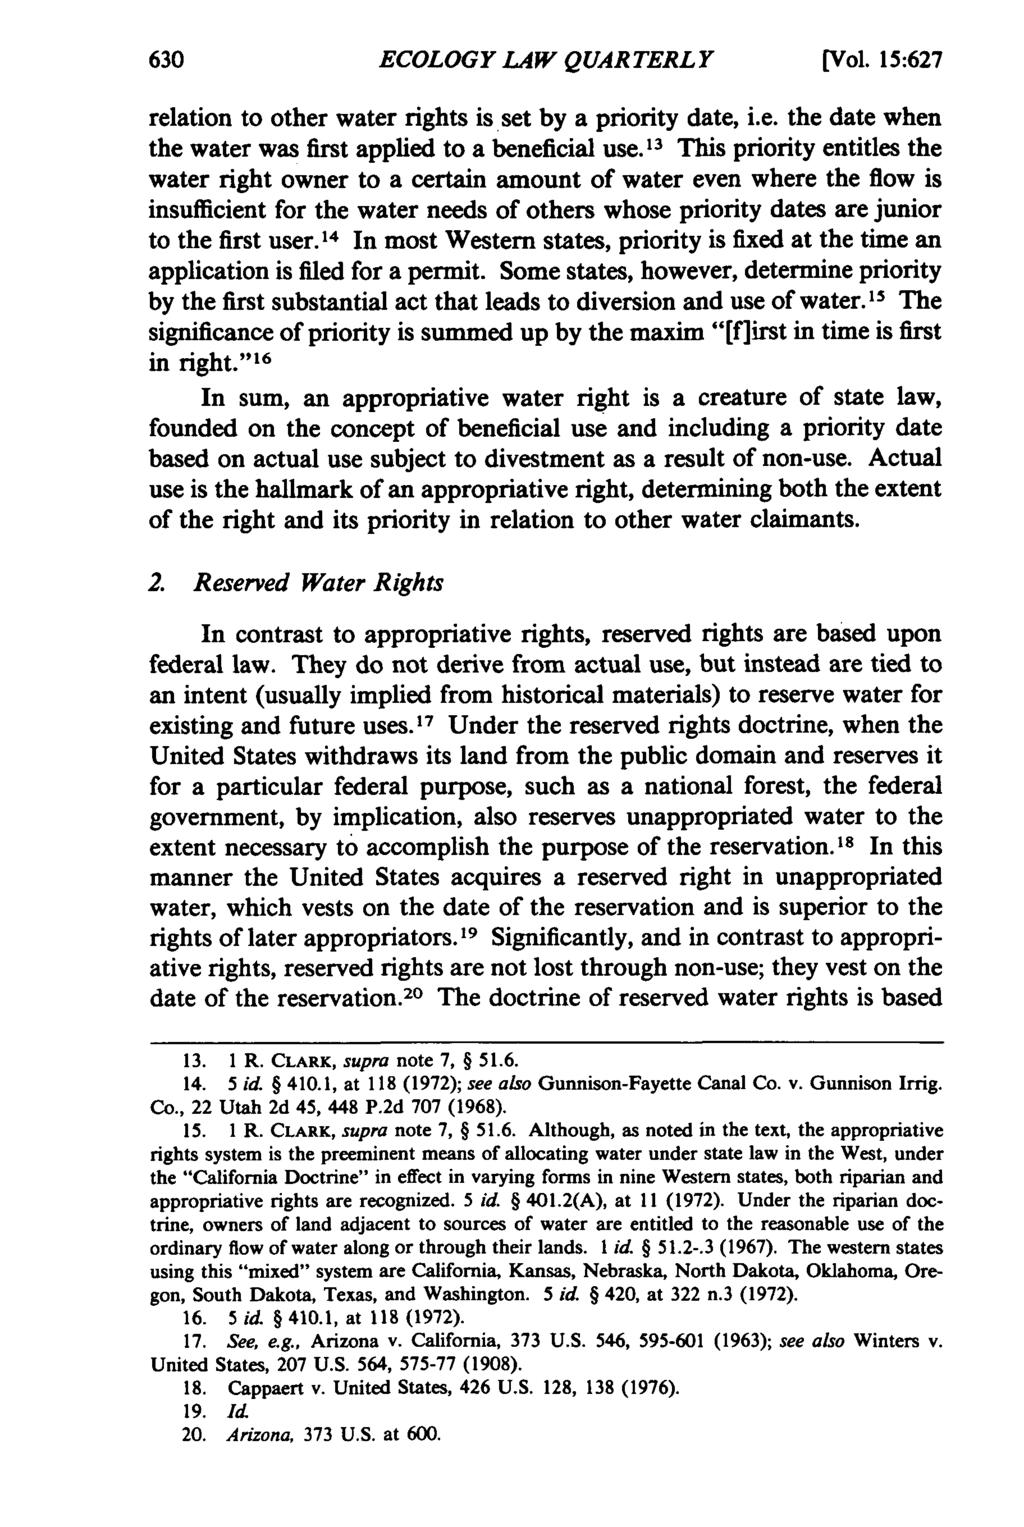 ECOLOGY LAW QUARTERLY [Vol. 15:627 relation to other water rights is set by a priority date, i.e. the date when the water was first applied to a beneficial use.